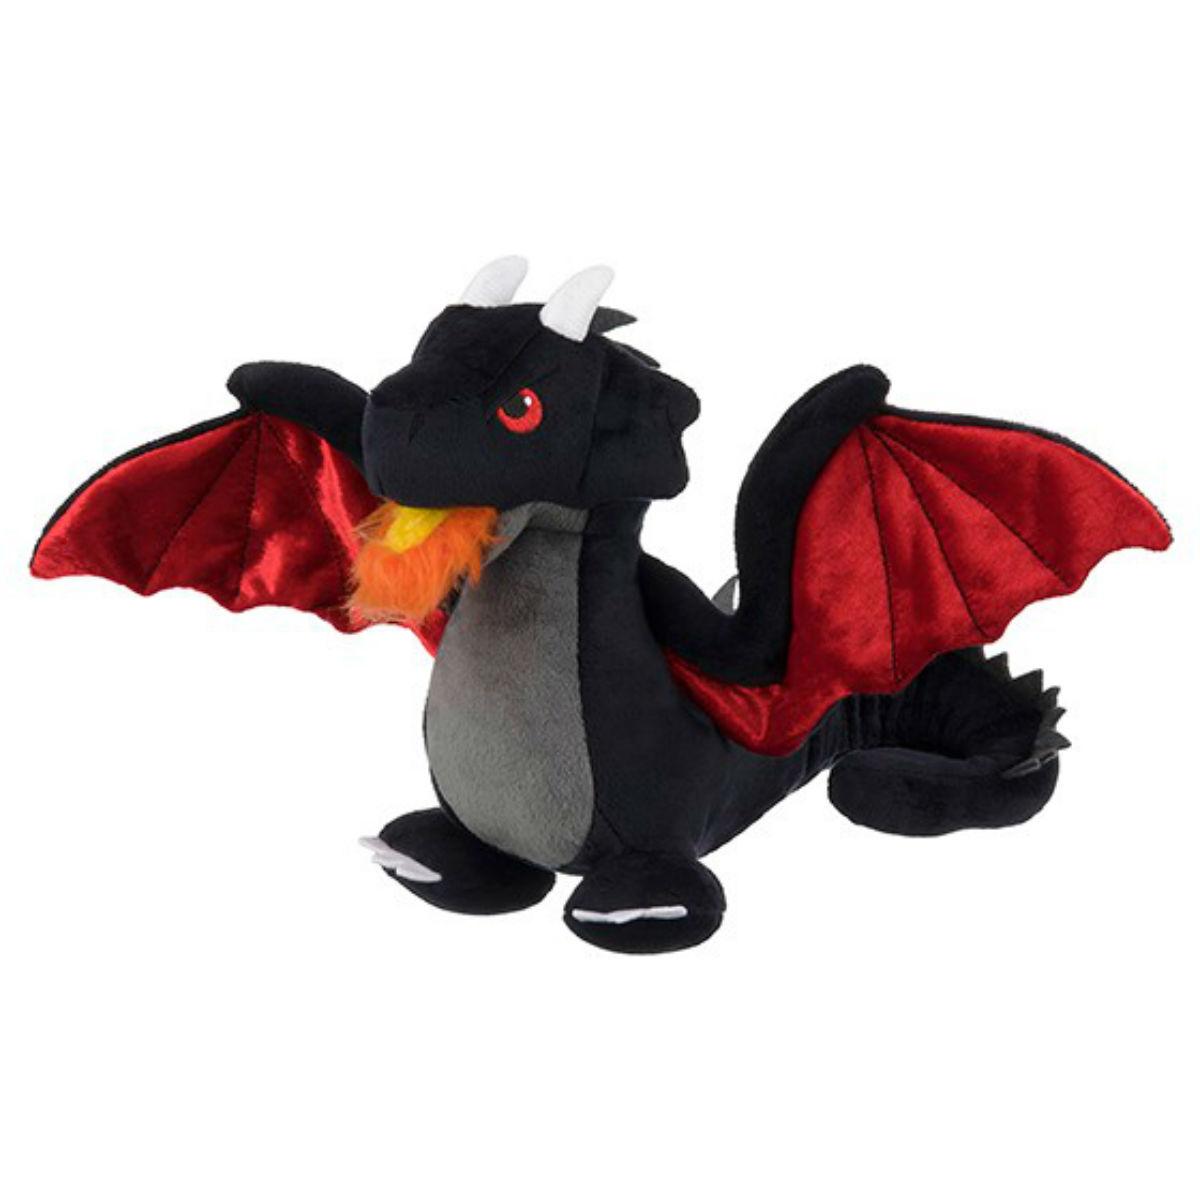 P.L.A.Y. Willow's Mythical Dog Toy - Dragon